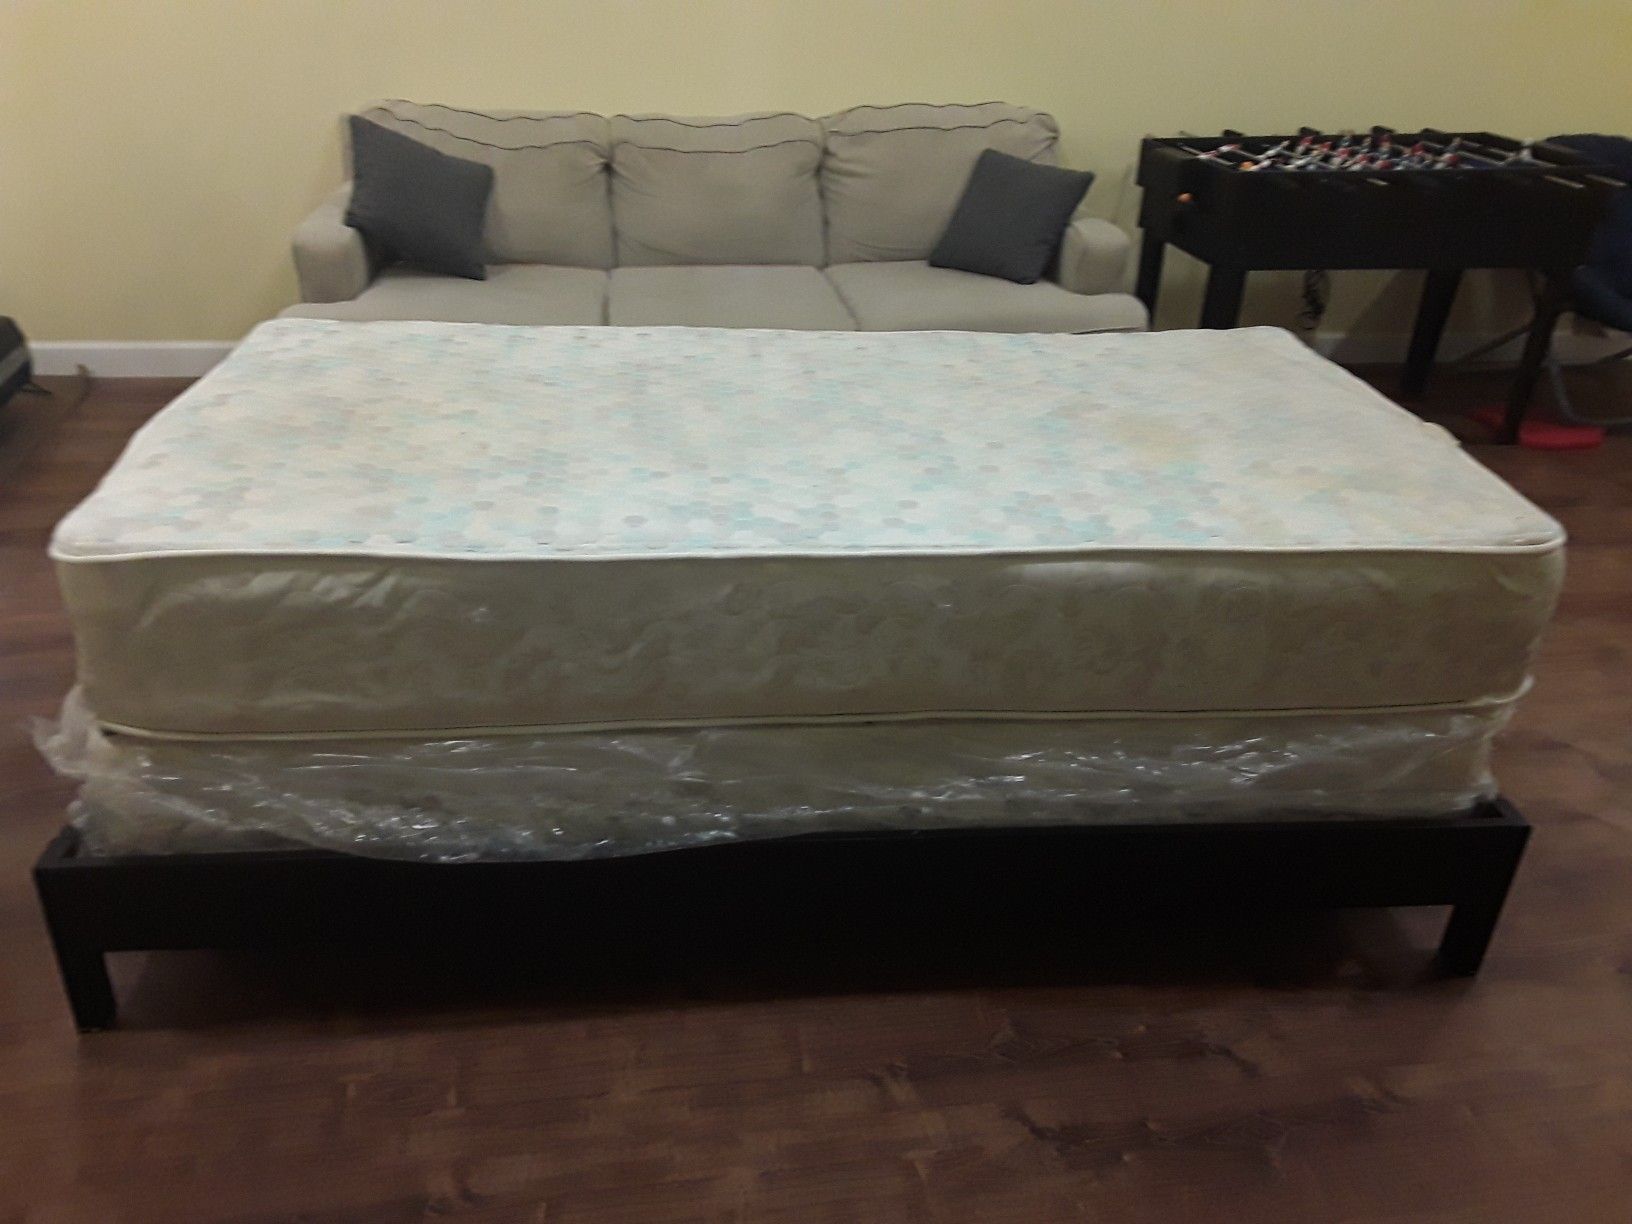 Clean Twin bed in very good condition